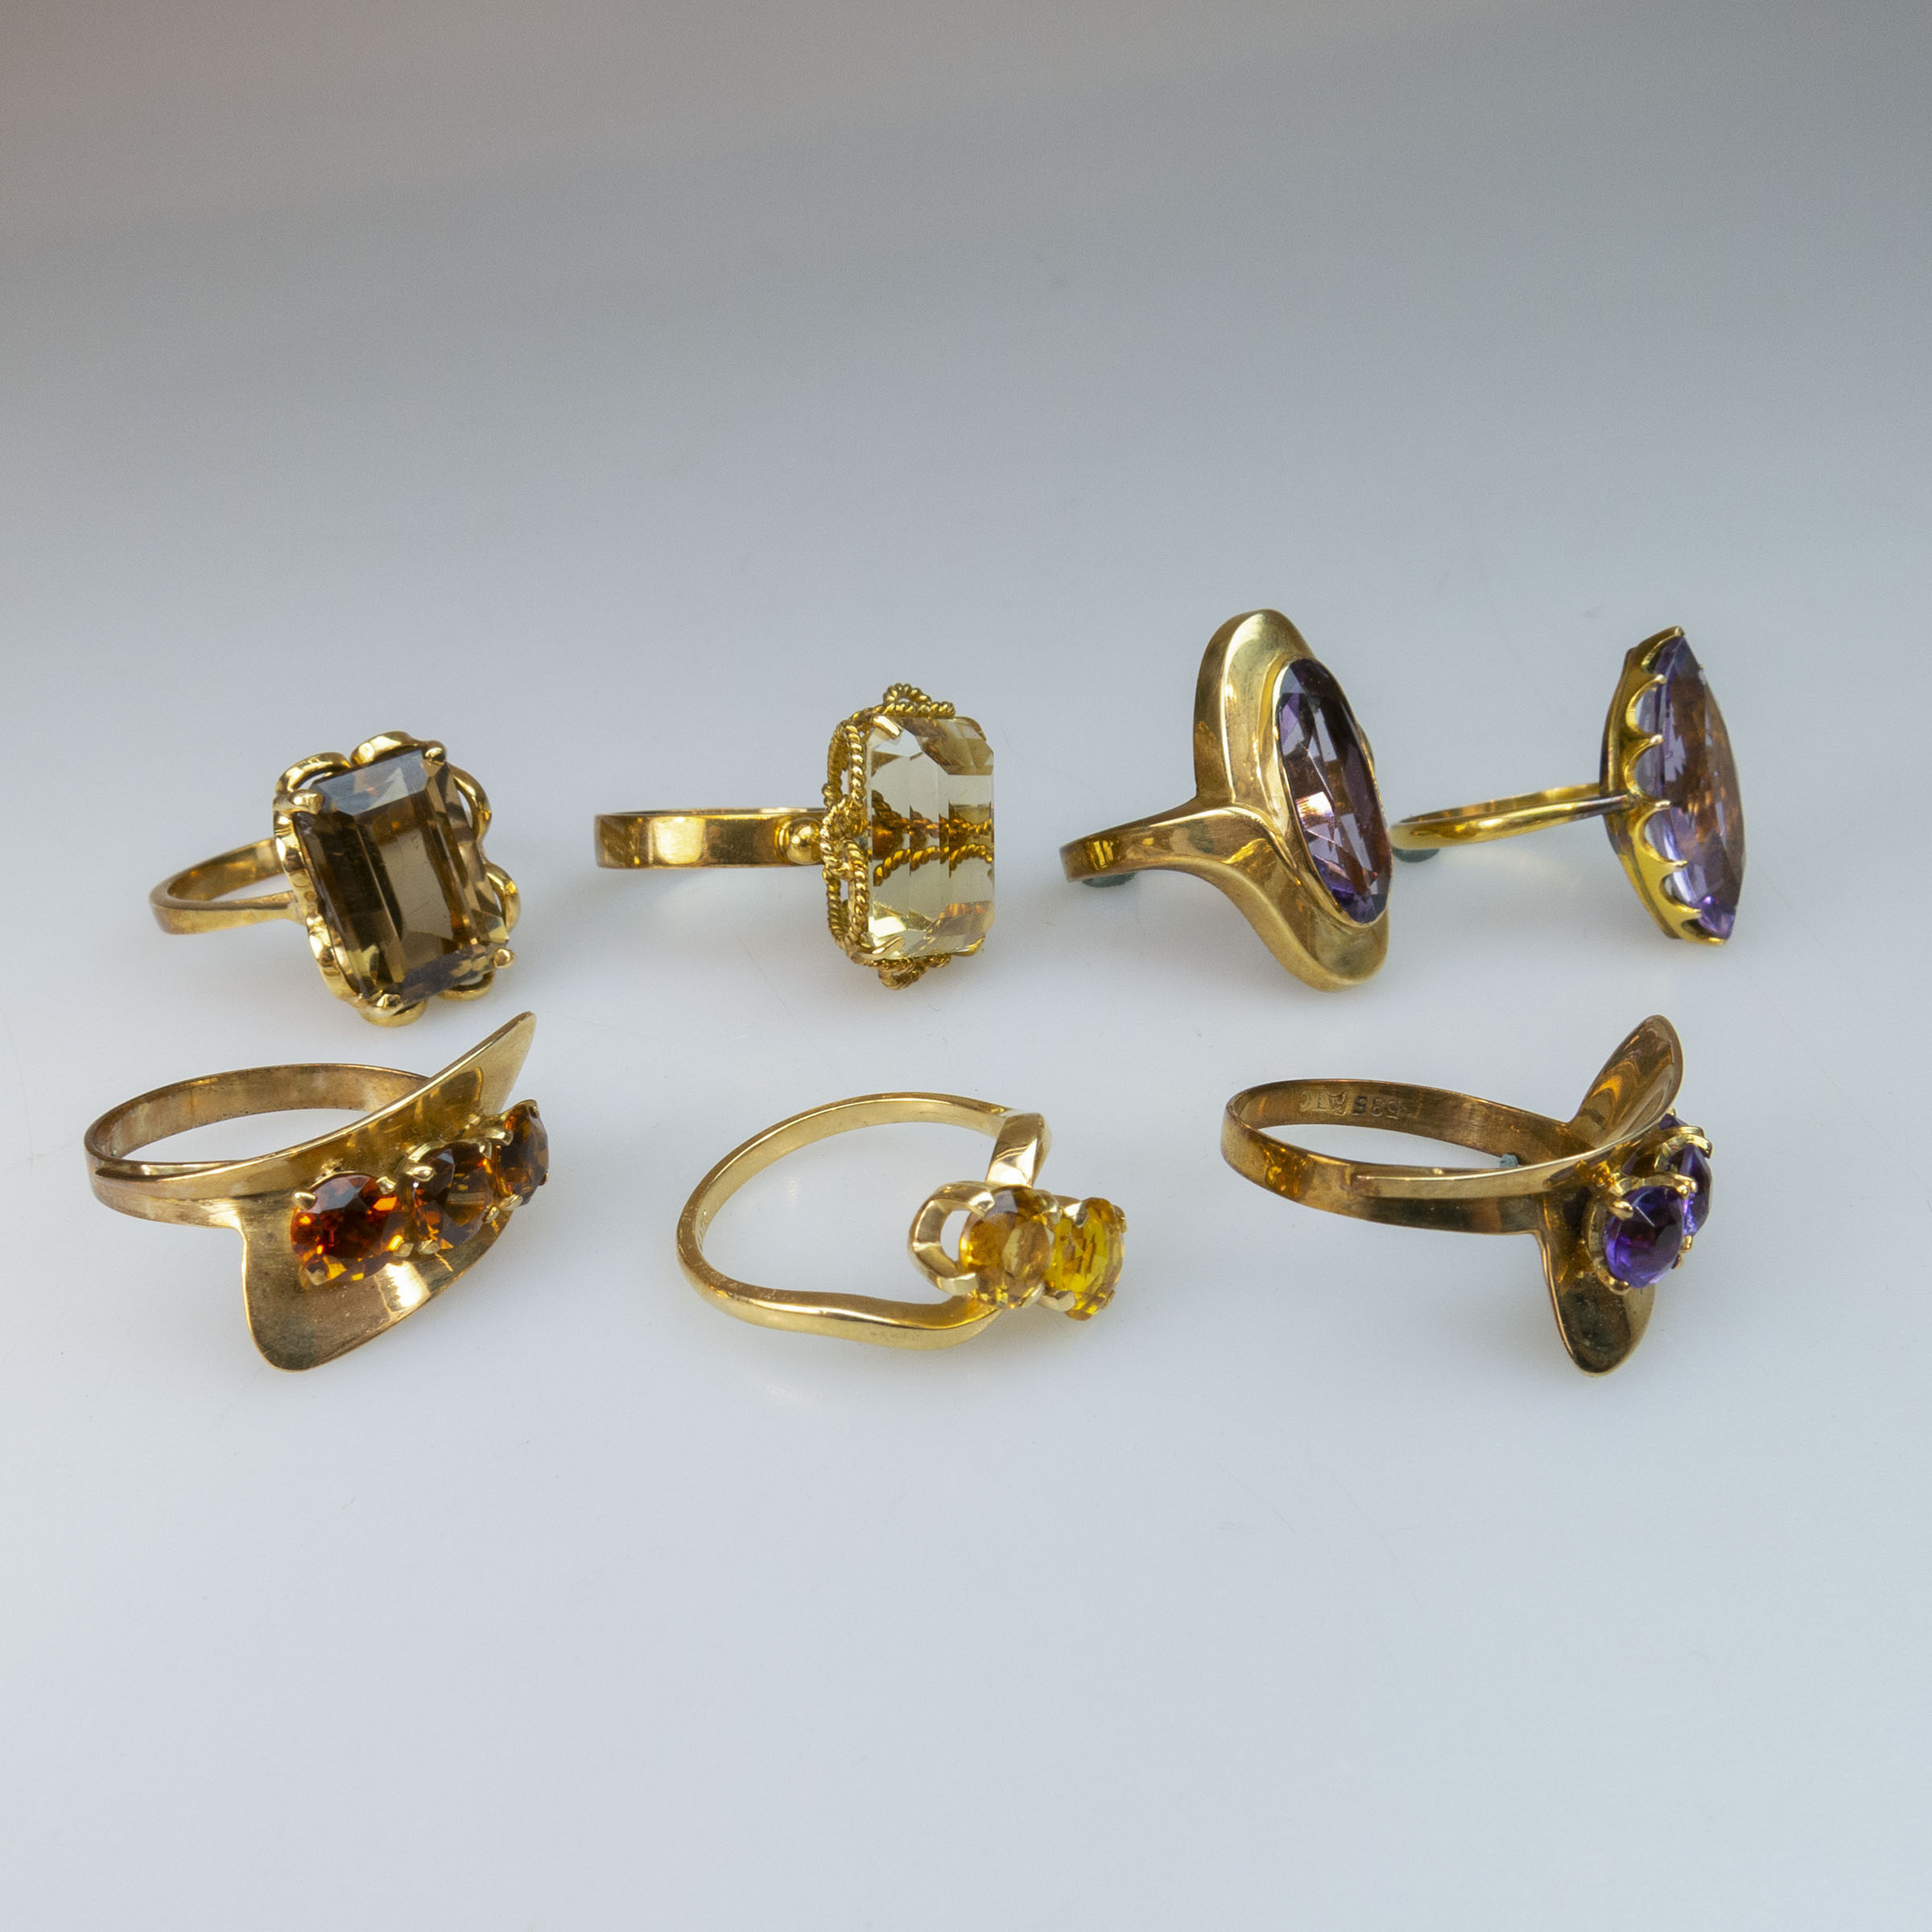 4 x 14k And 3 x 18k Yellow Gold Rings